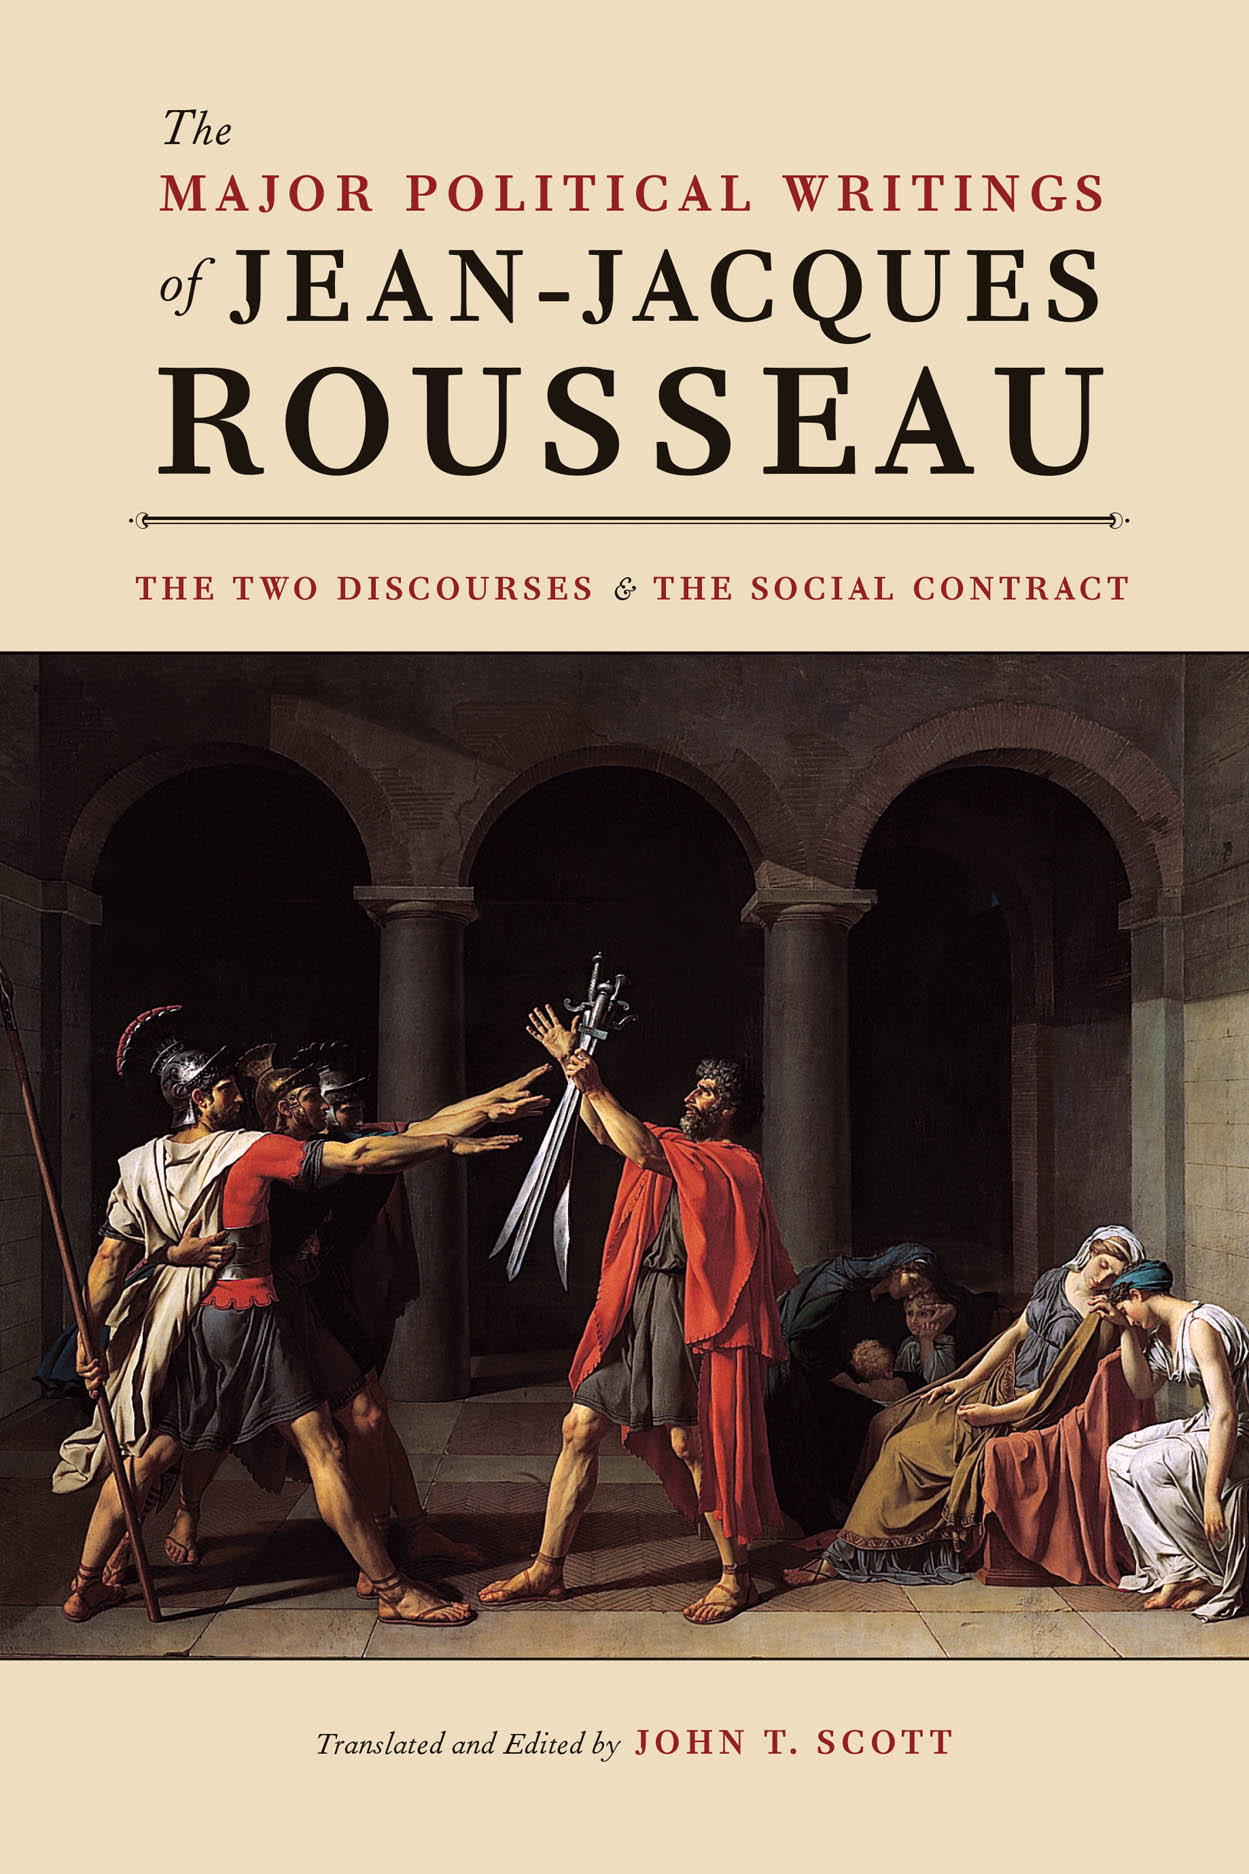 Extra Independence deep The Major Political Writings of Jean-Jacques Rousseau: The Two "Discourses"  and the "Social Contract", Rousseau, Scott